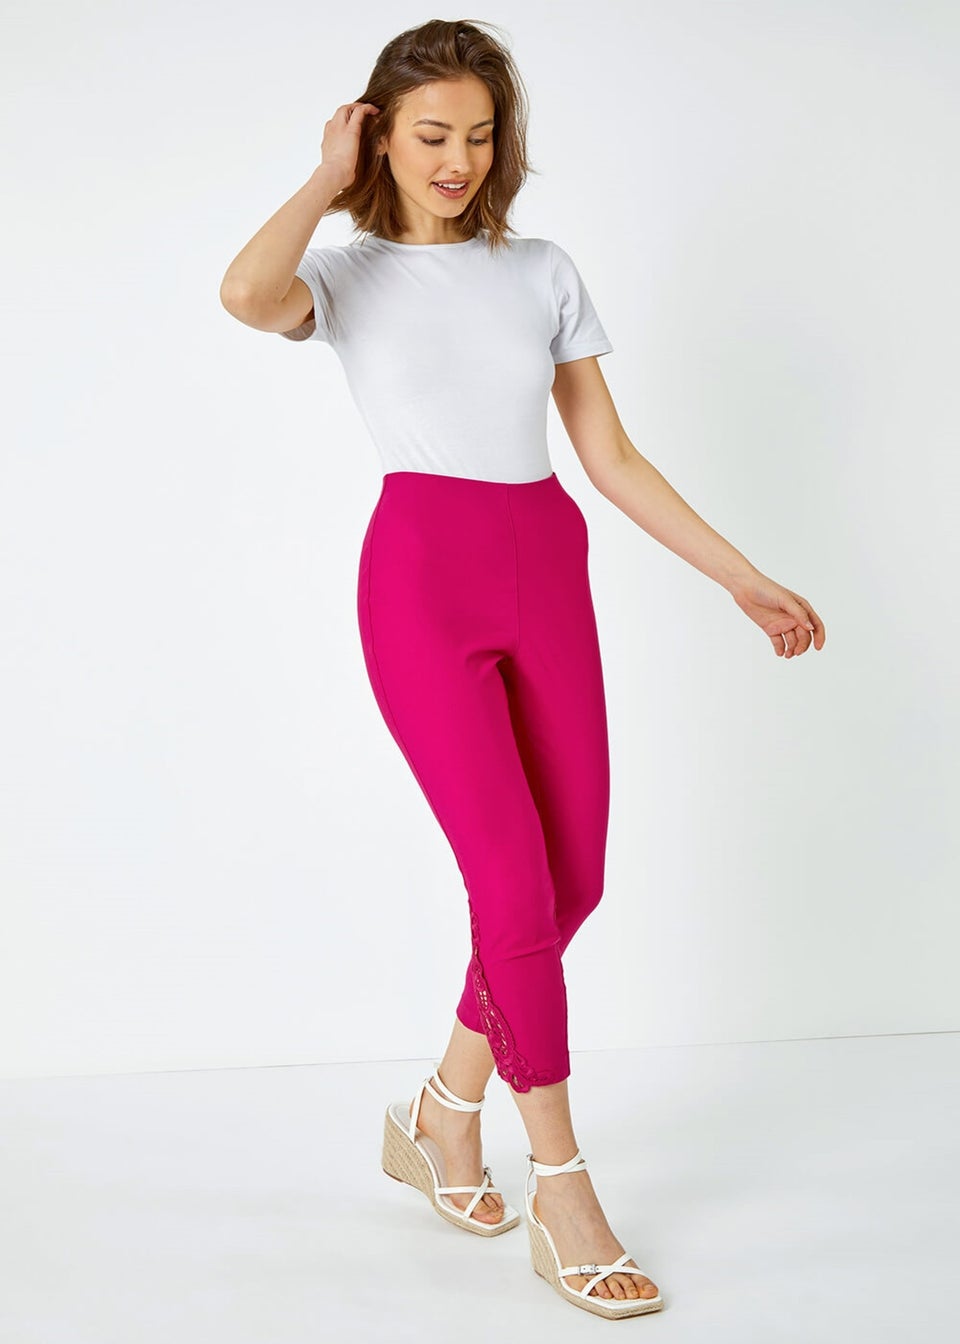 Roman Pink Lace Insert Crop Stretch Trousers